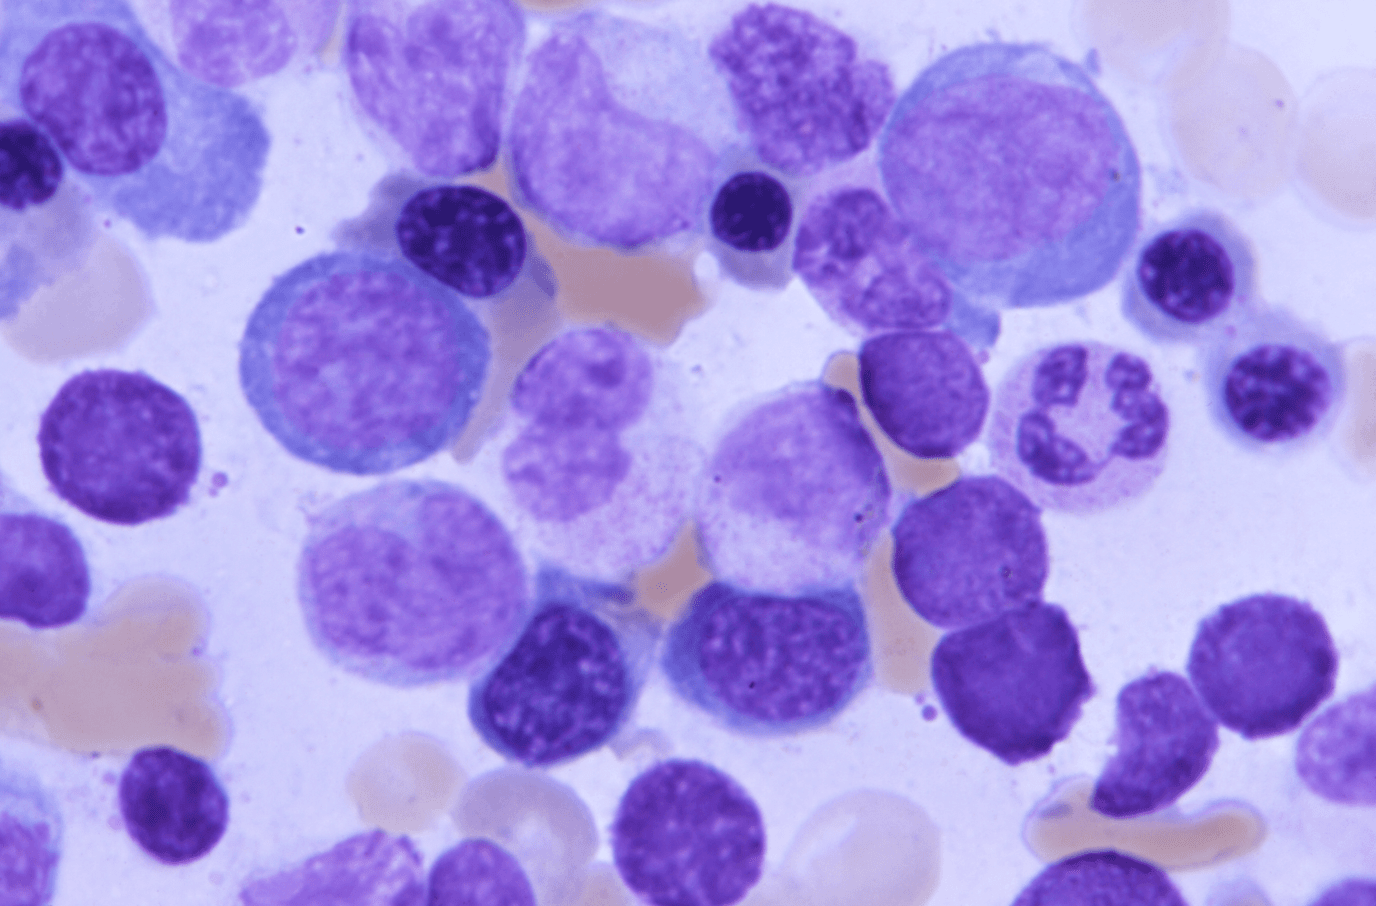 White blood cells in patient with acute leukemia